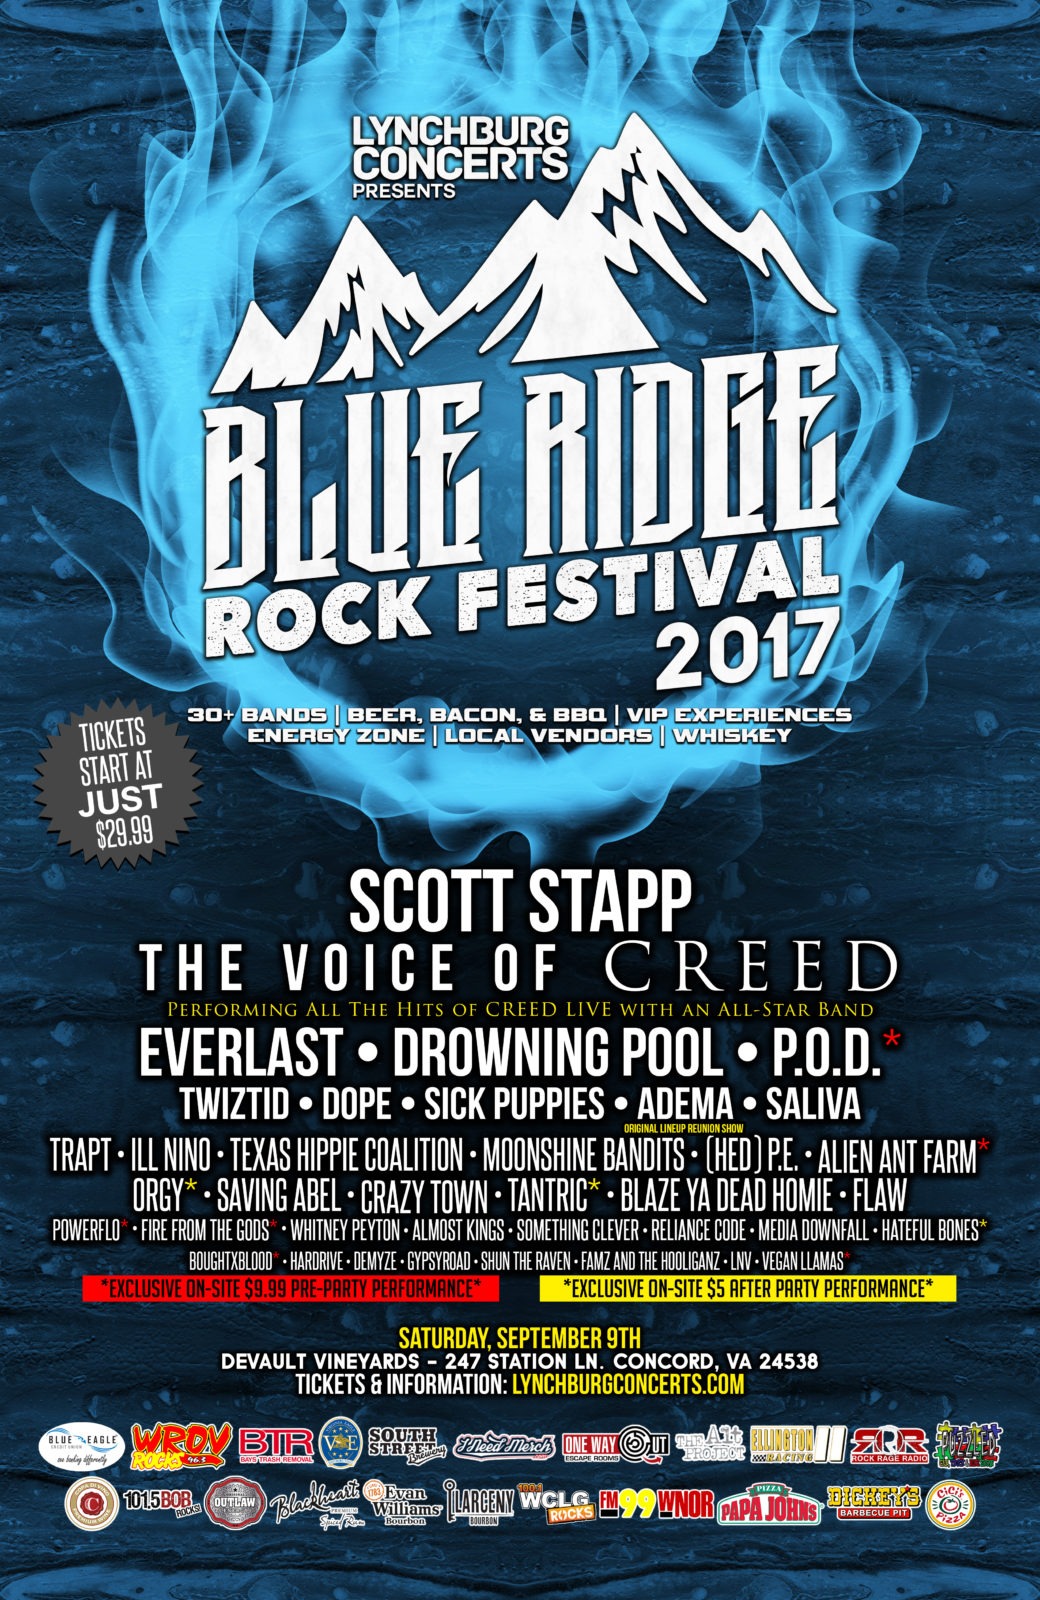 LYNCHBURG CONCERTS AND PHASE 2 ANNOUNCE THAT BLUE RIDGE ROCK FESTIVAL WILL BE MOVING TO A NEW LOCATION DUE TO HIGH TICKET SALES